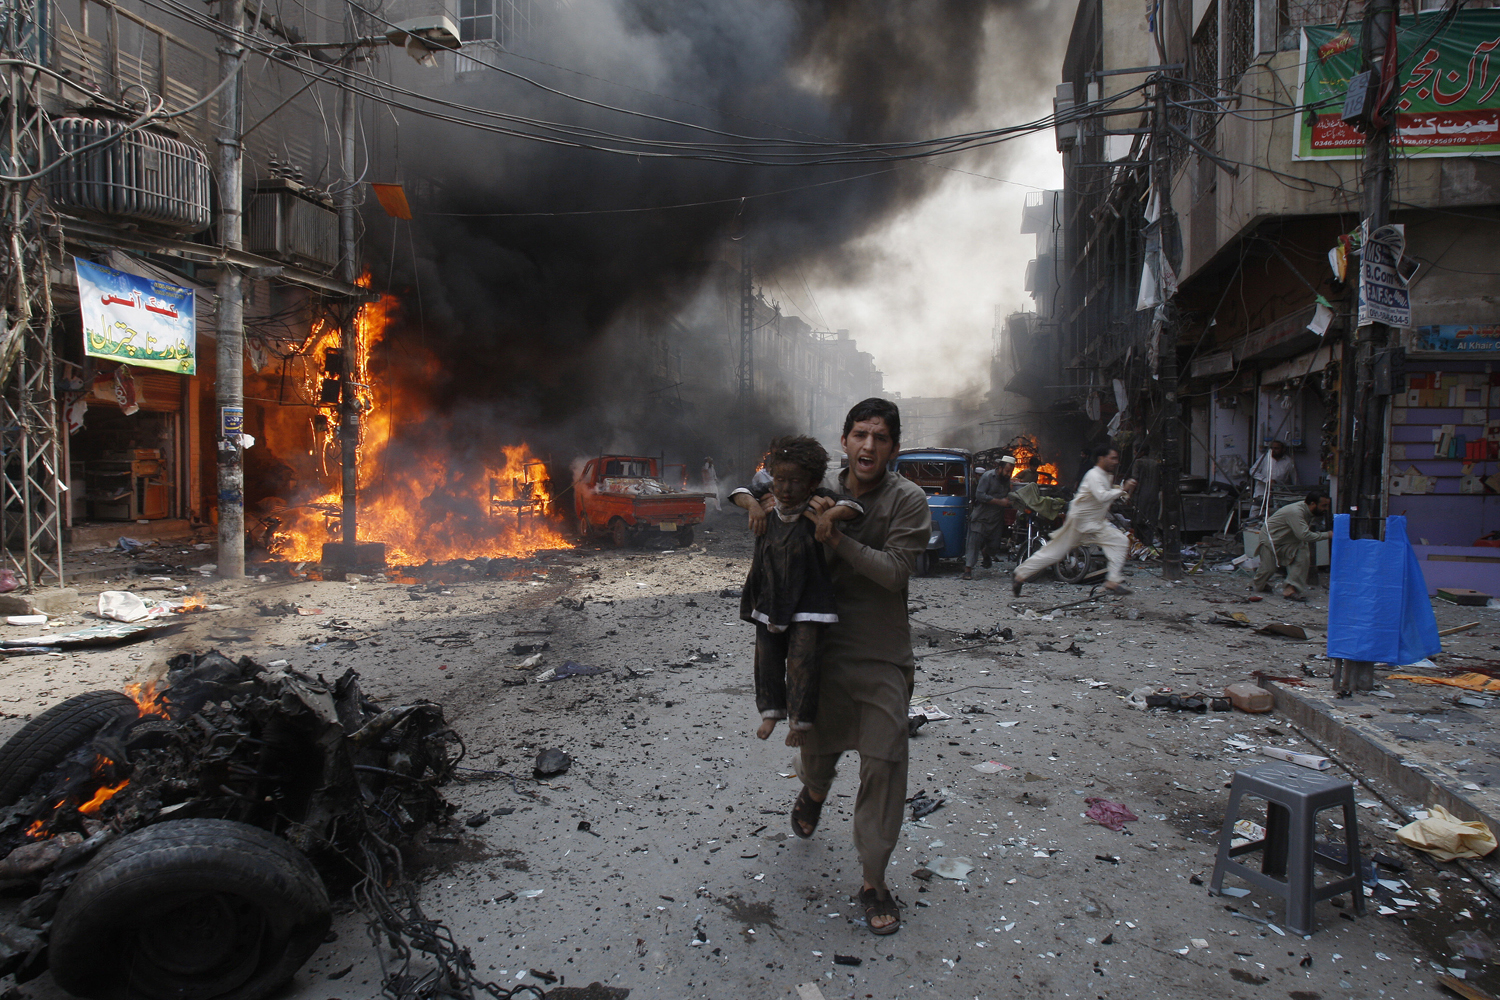 Sept. 29, 2013. A Pakistani man carrying a child rushes away from the site of a blast shortly after a car exploded in Peshawar, Pakistan.